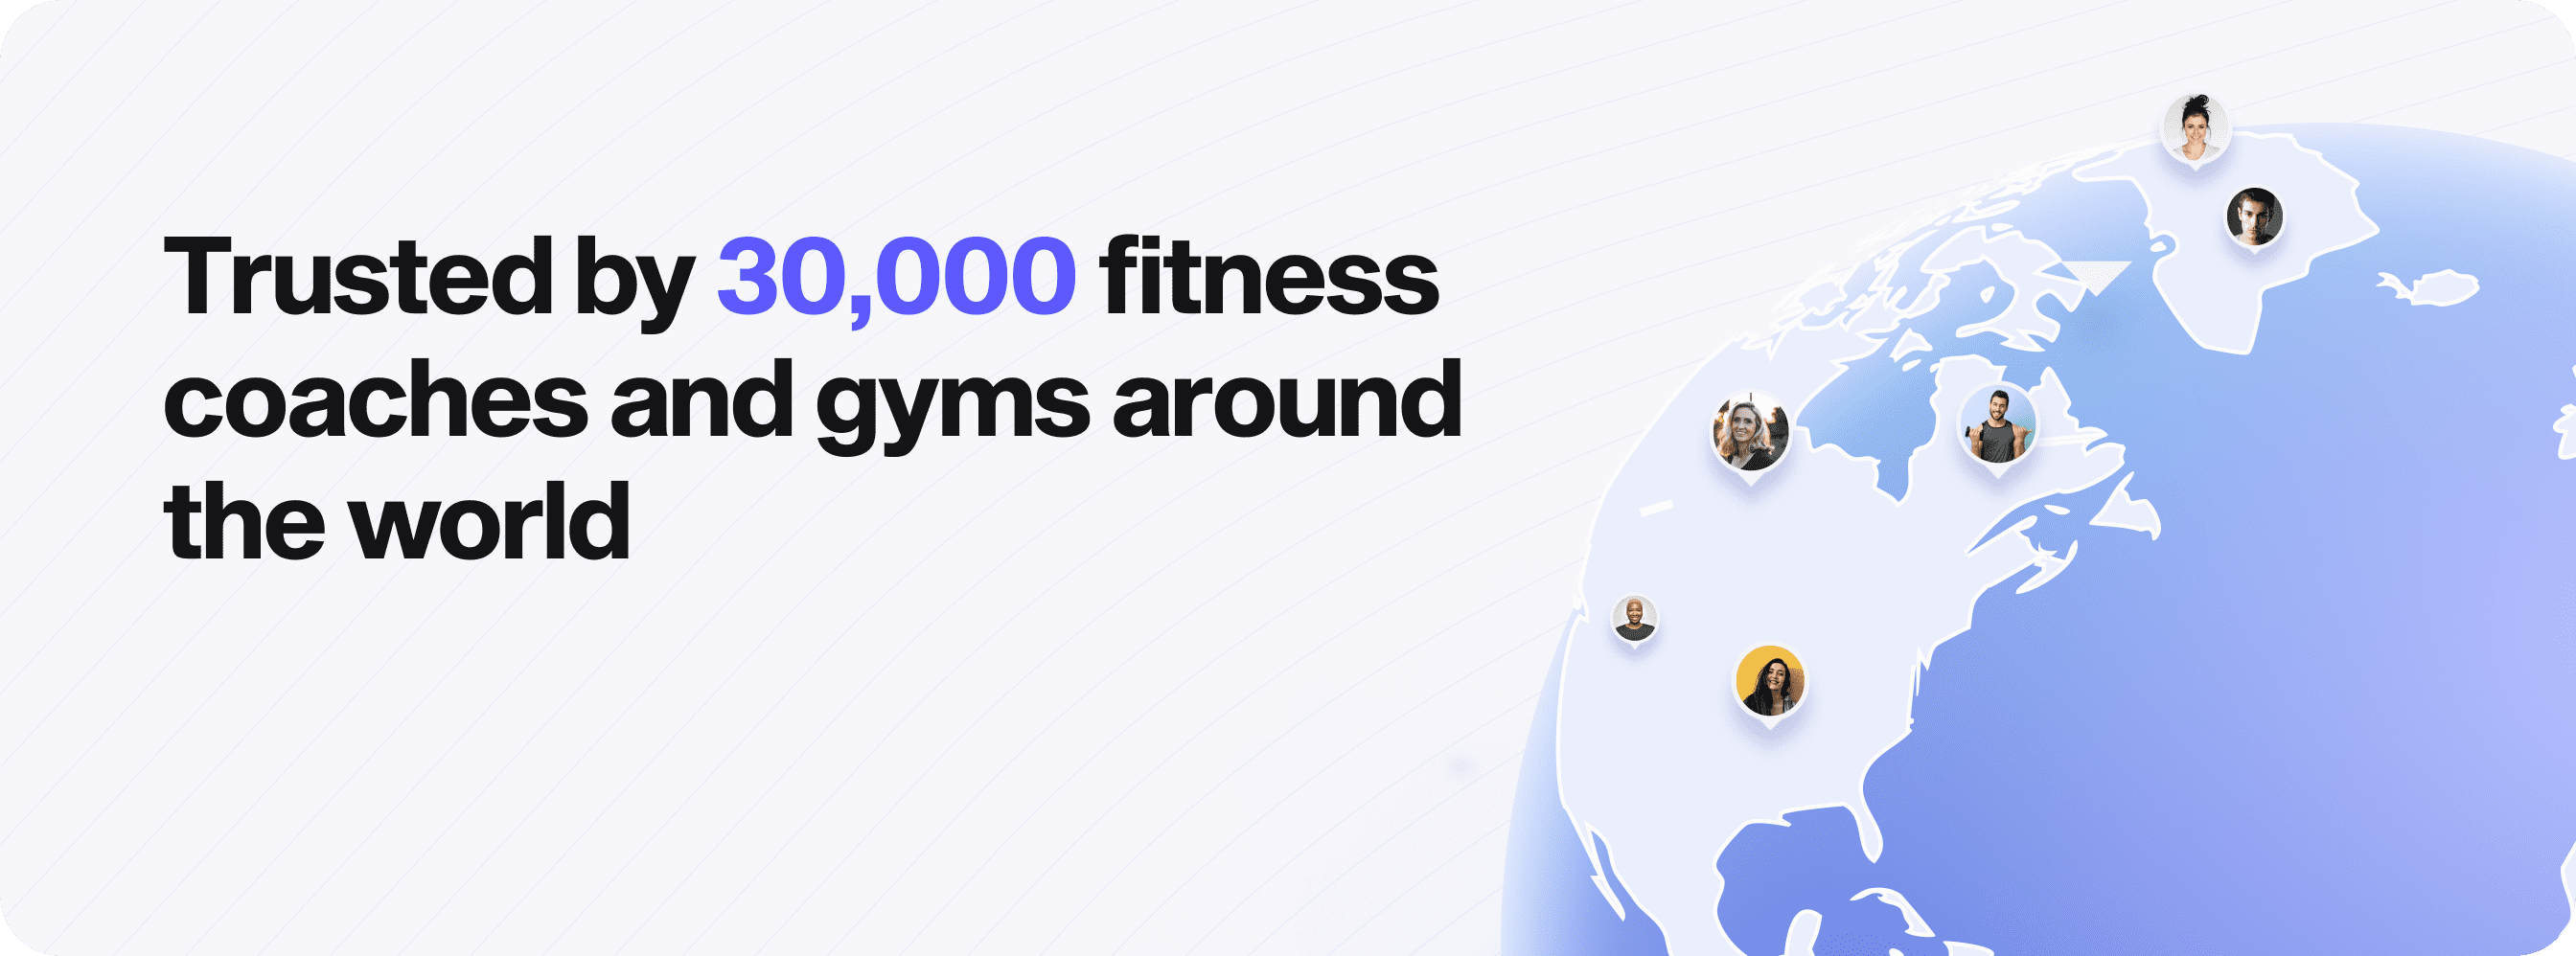 Fitness Trainer Software trusted by 30,000 fitness coaches and gyms around the world